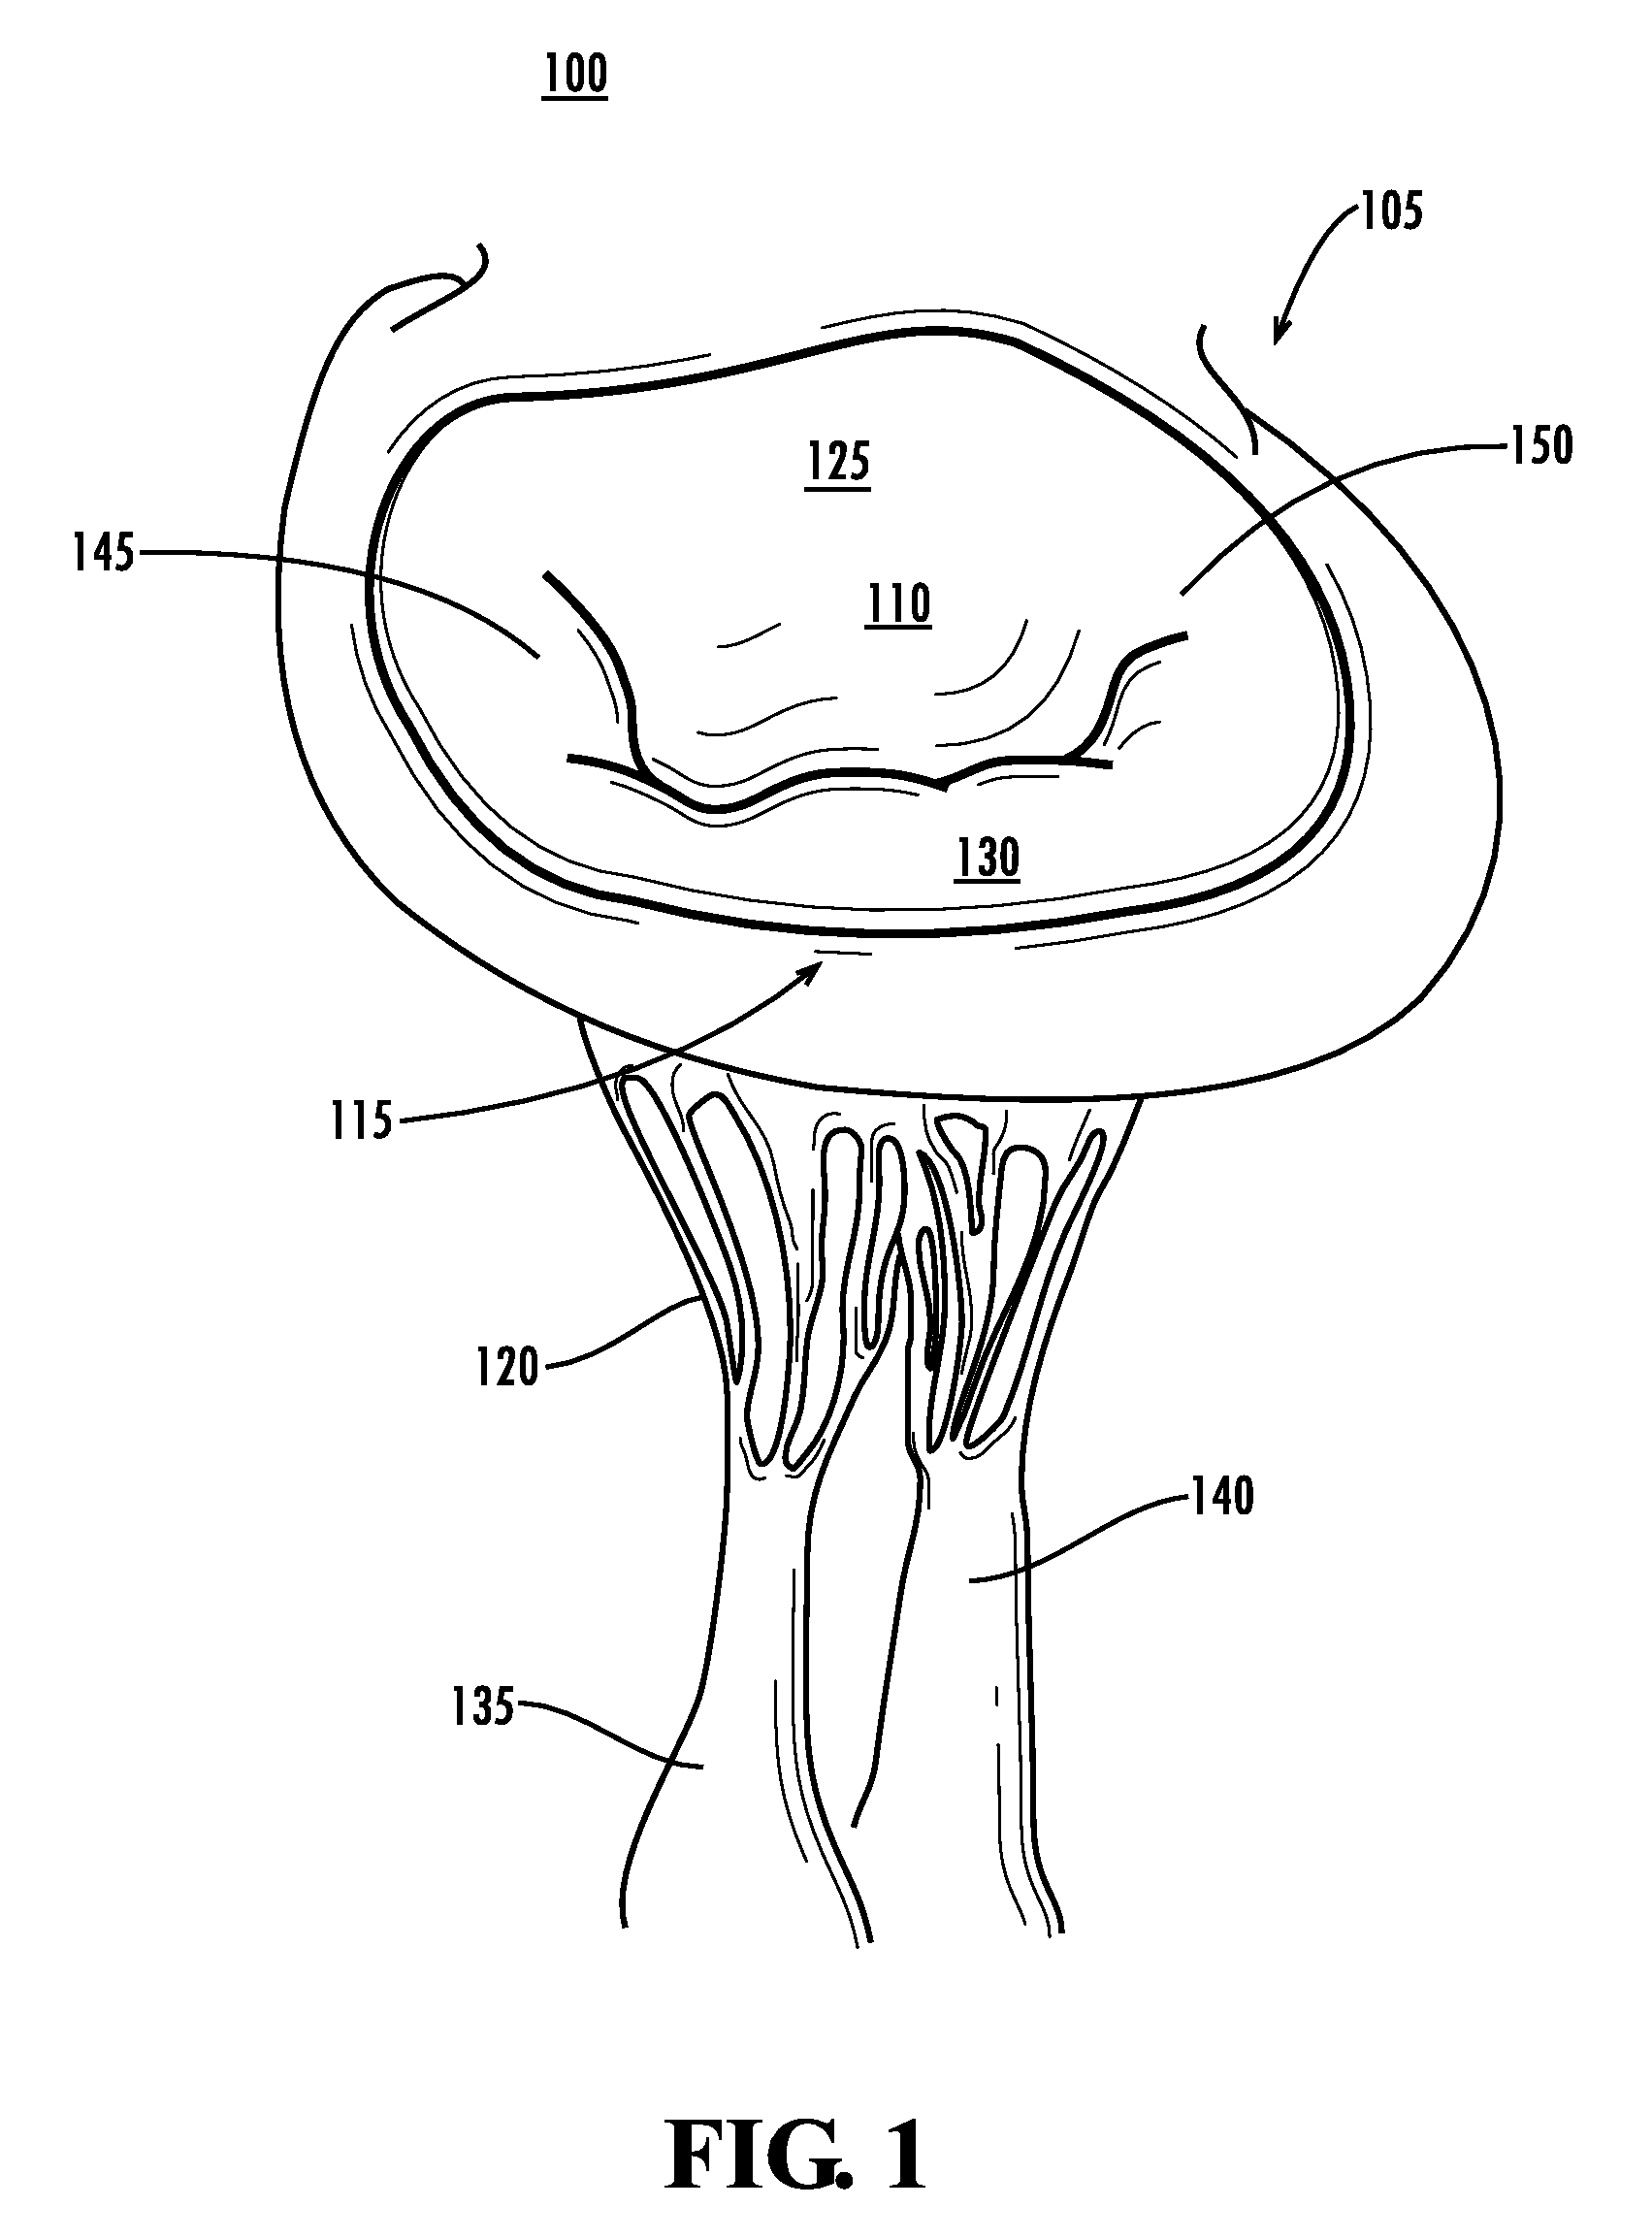 Papillary muscle position control devices, systems, & methods